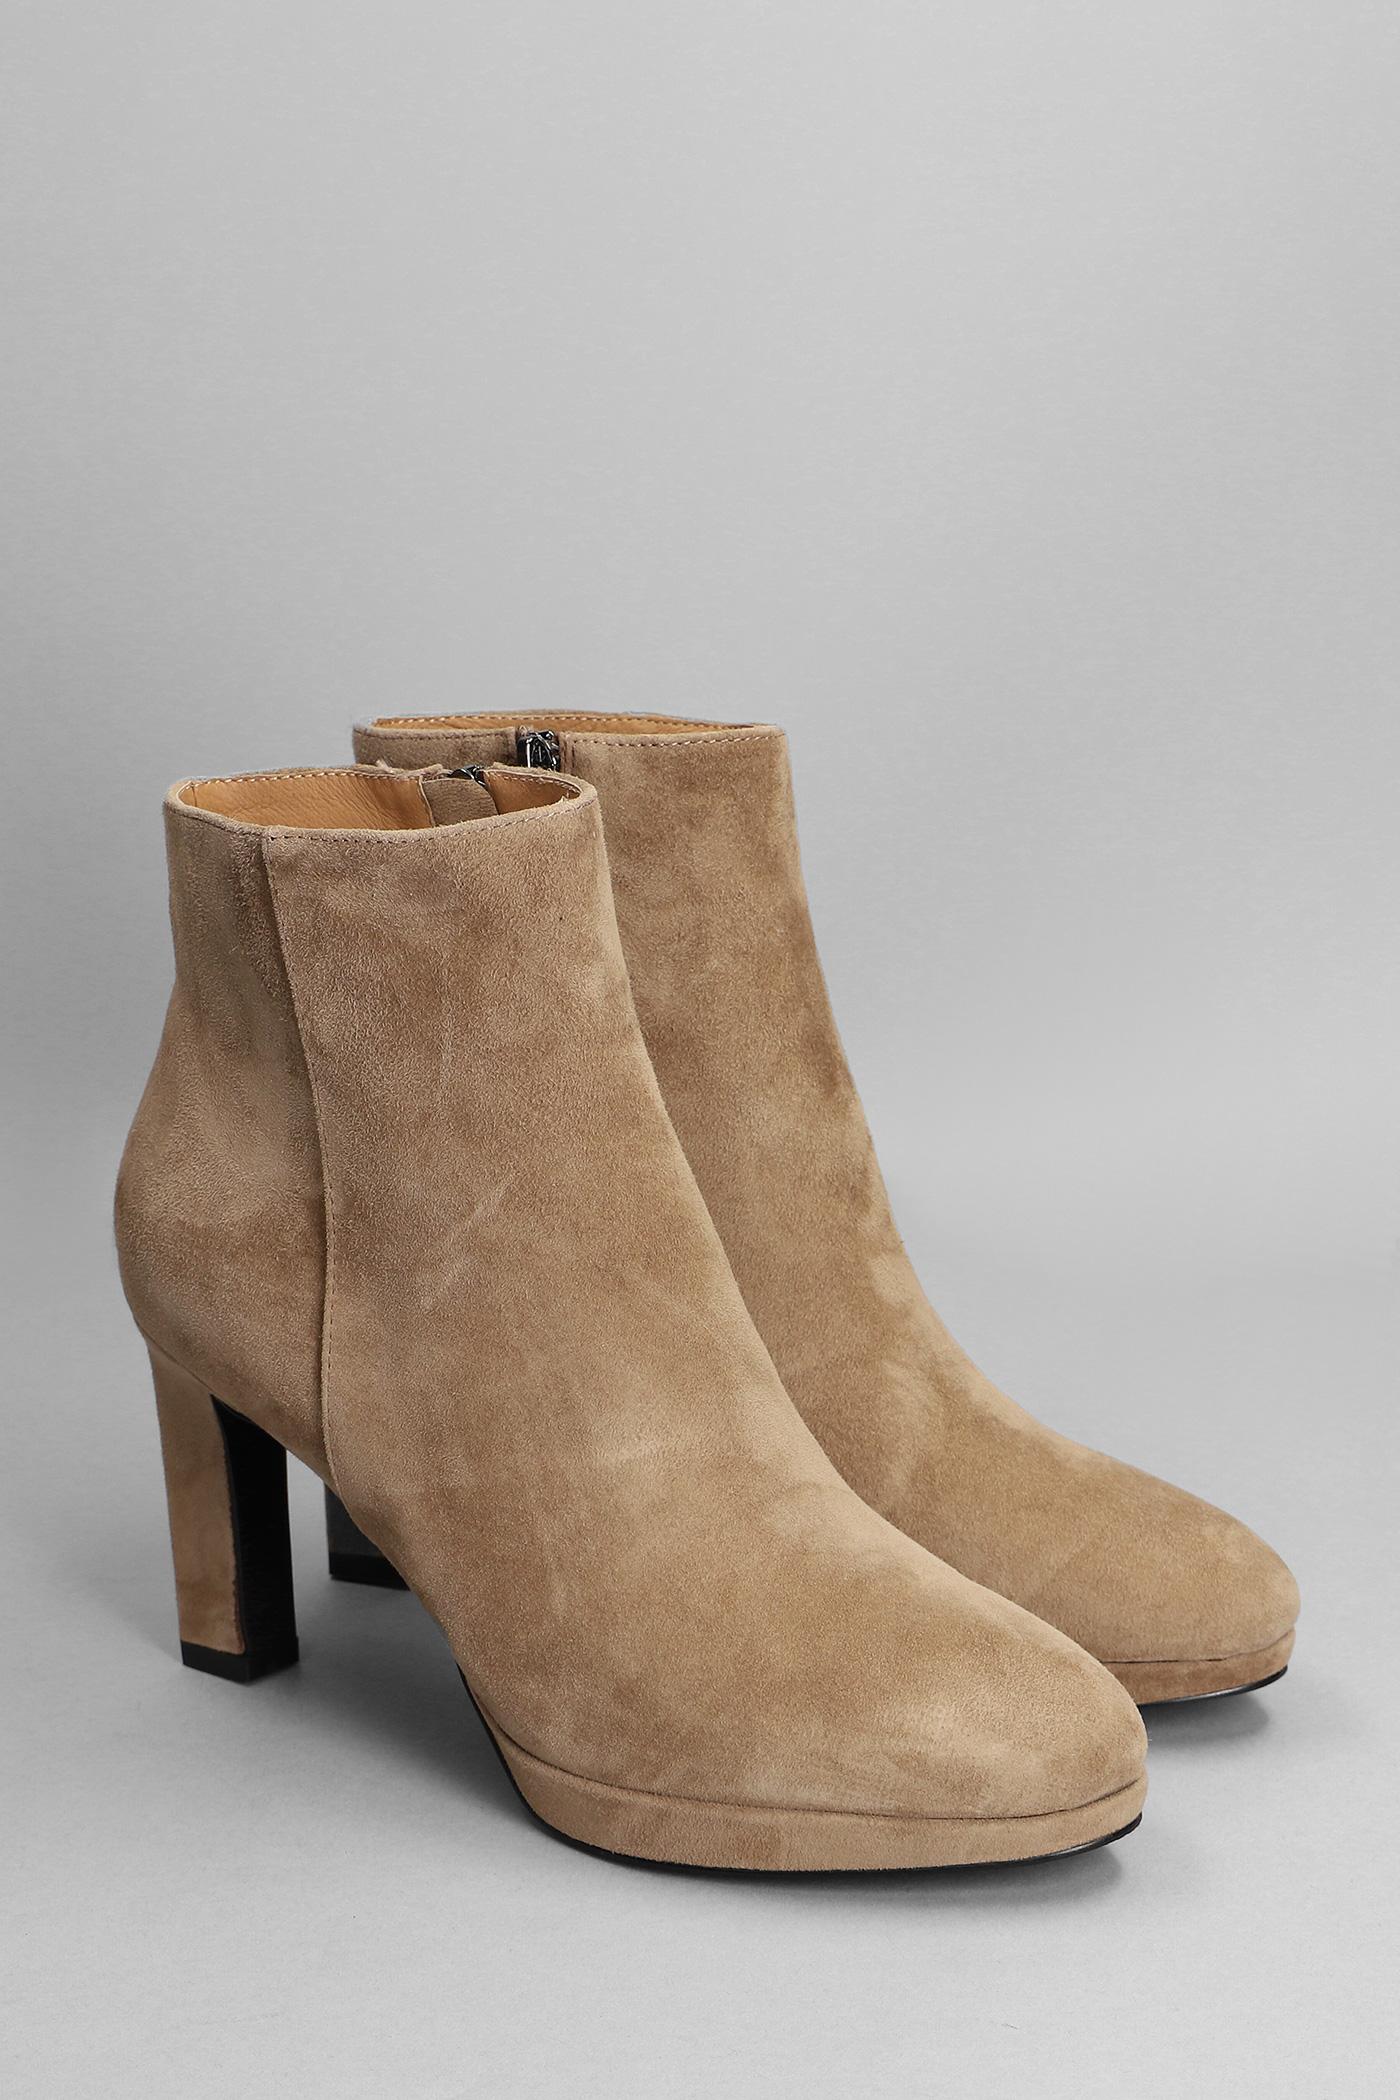 Bibi Lou High Heels Ankle Boots In Taupe Suede in Gray | Lyst